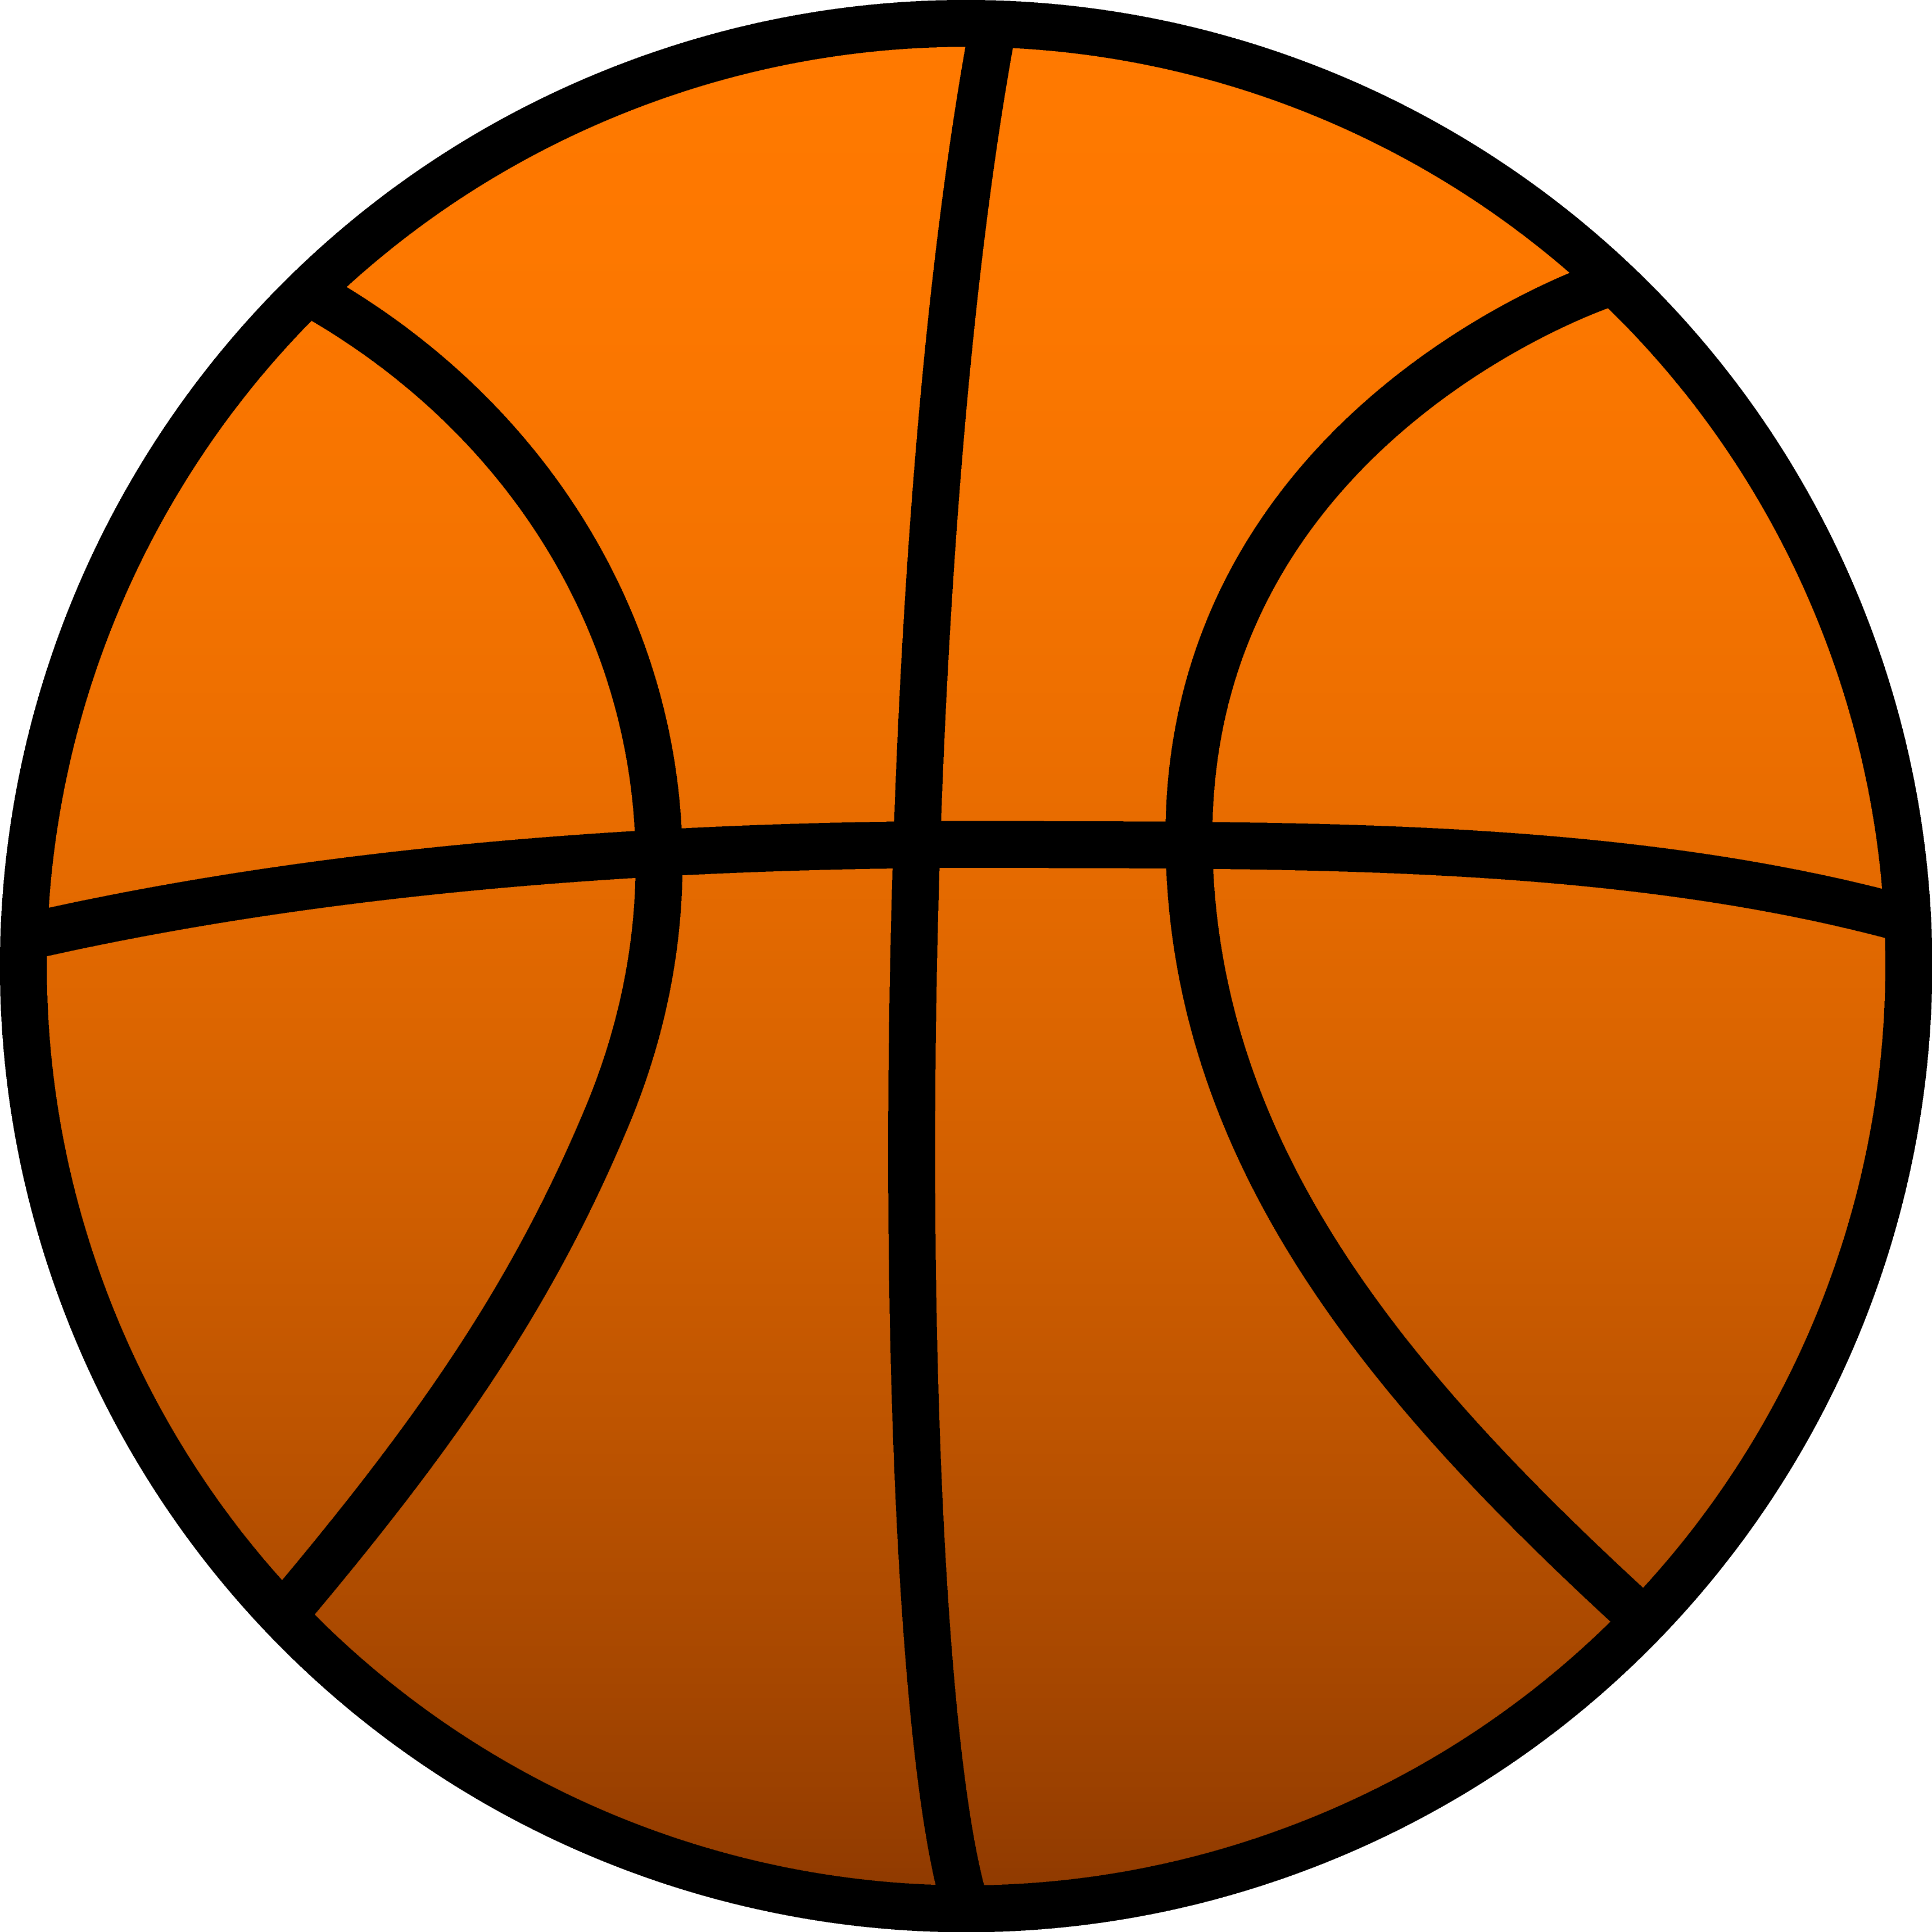 Basketball Clipart   Clipart Panda   Free Clipart Images